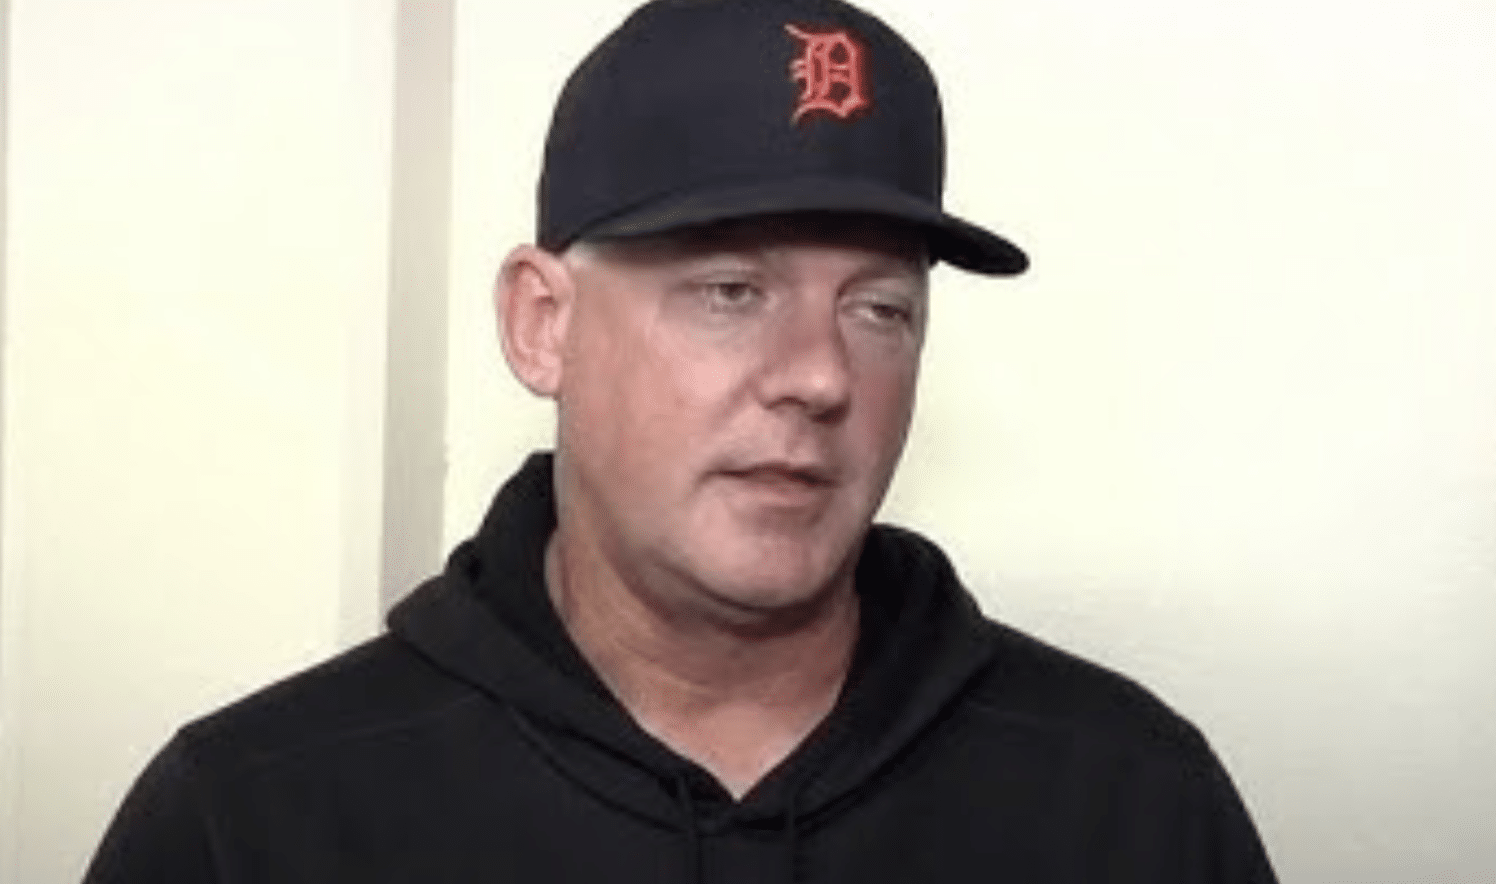 He's stick around long term, and now, Detroit Tigers fans react A.J. Hinch's Compassionate Message to Austin Meadows